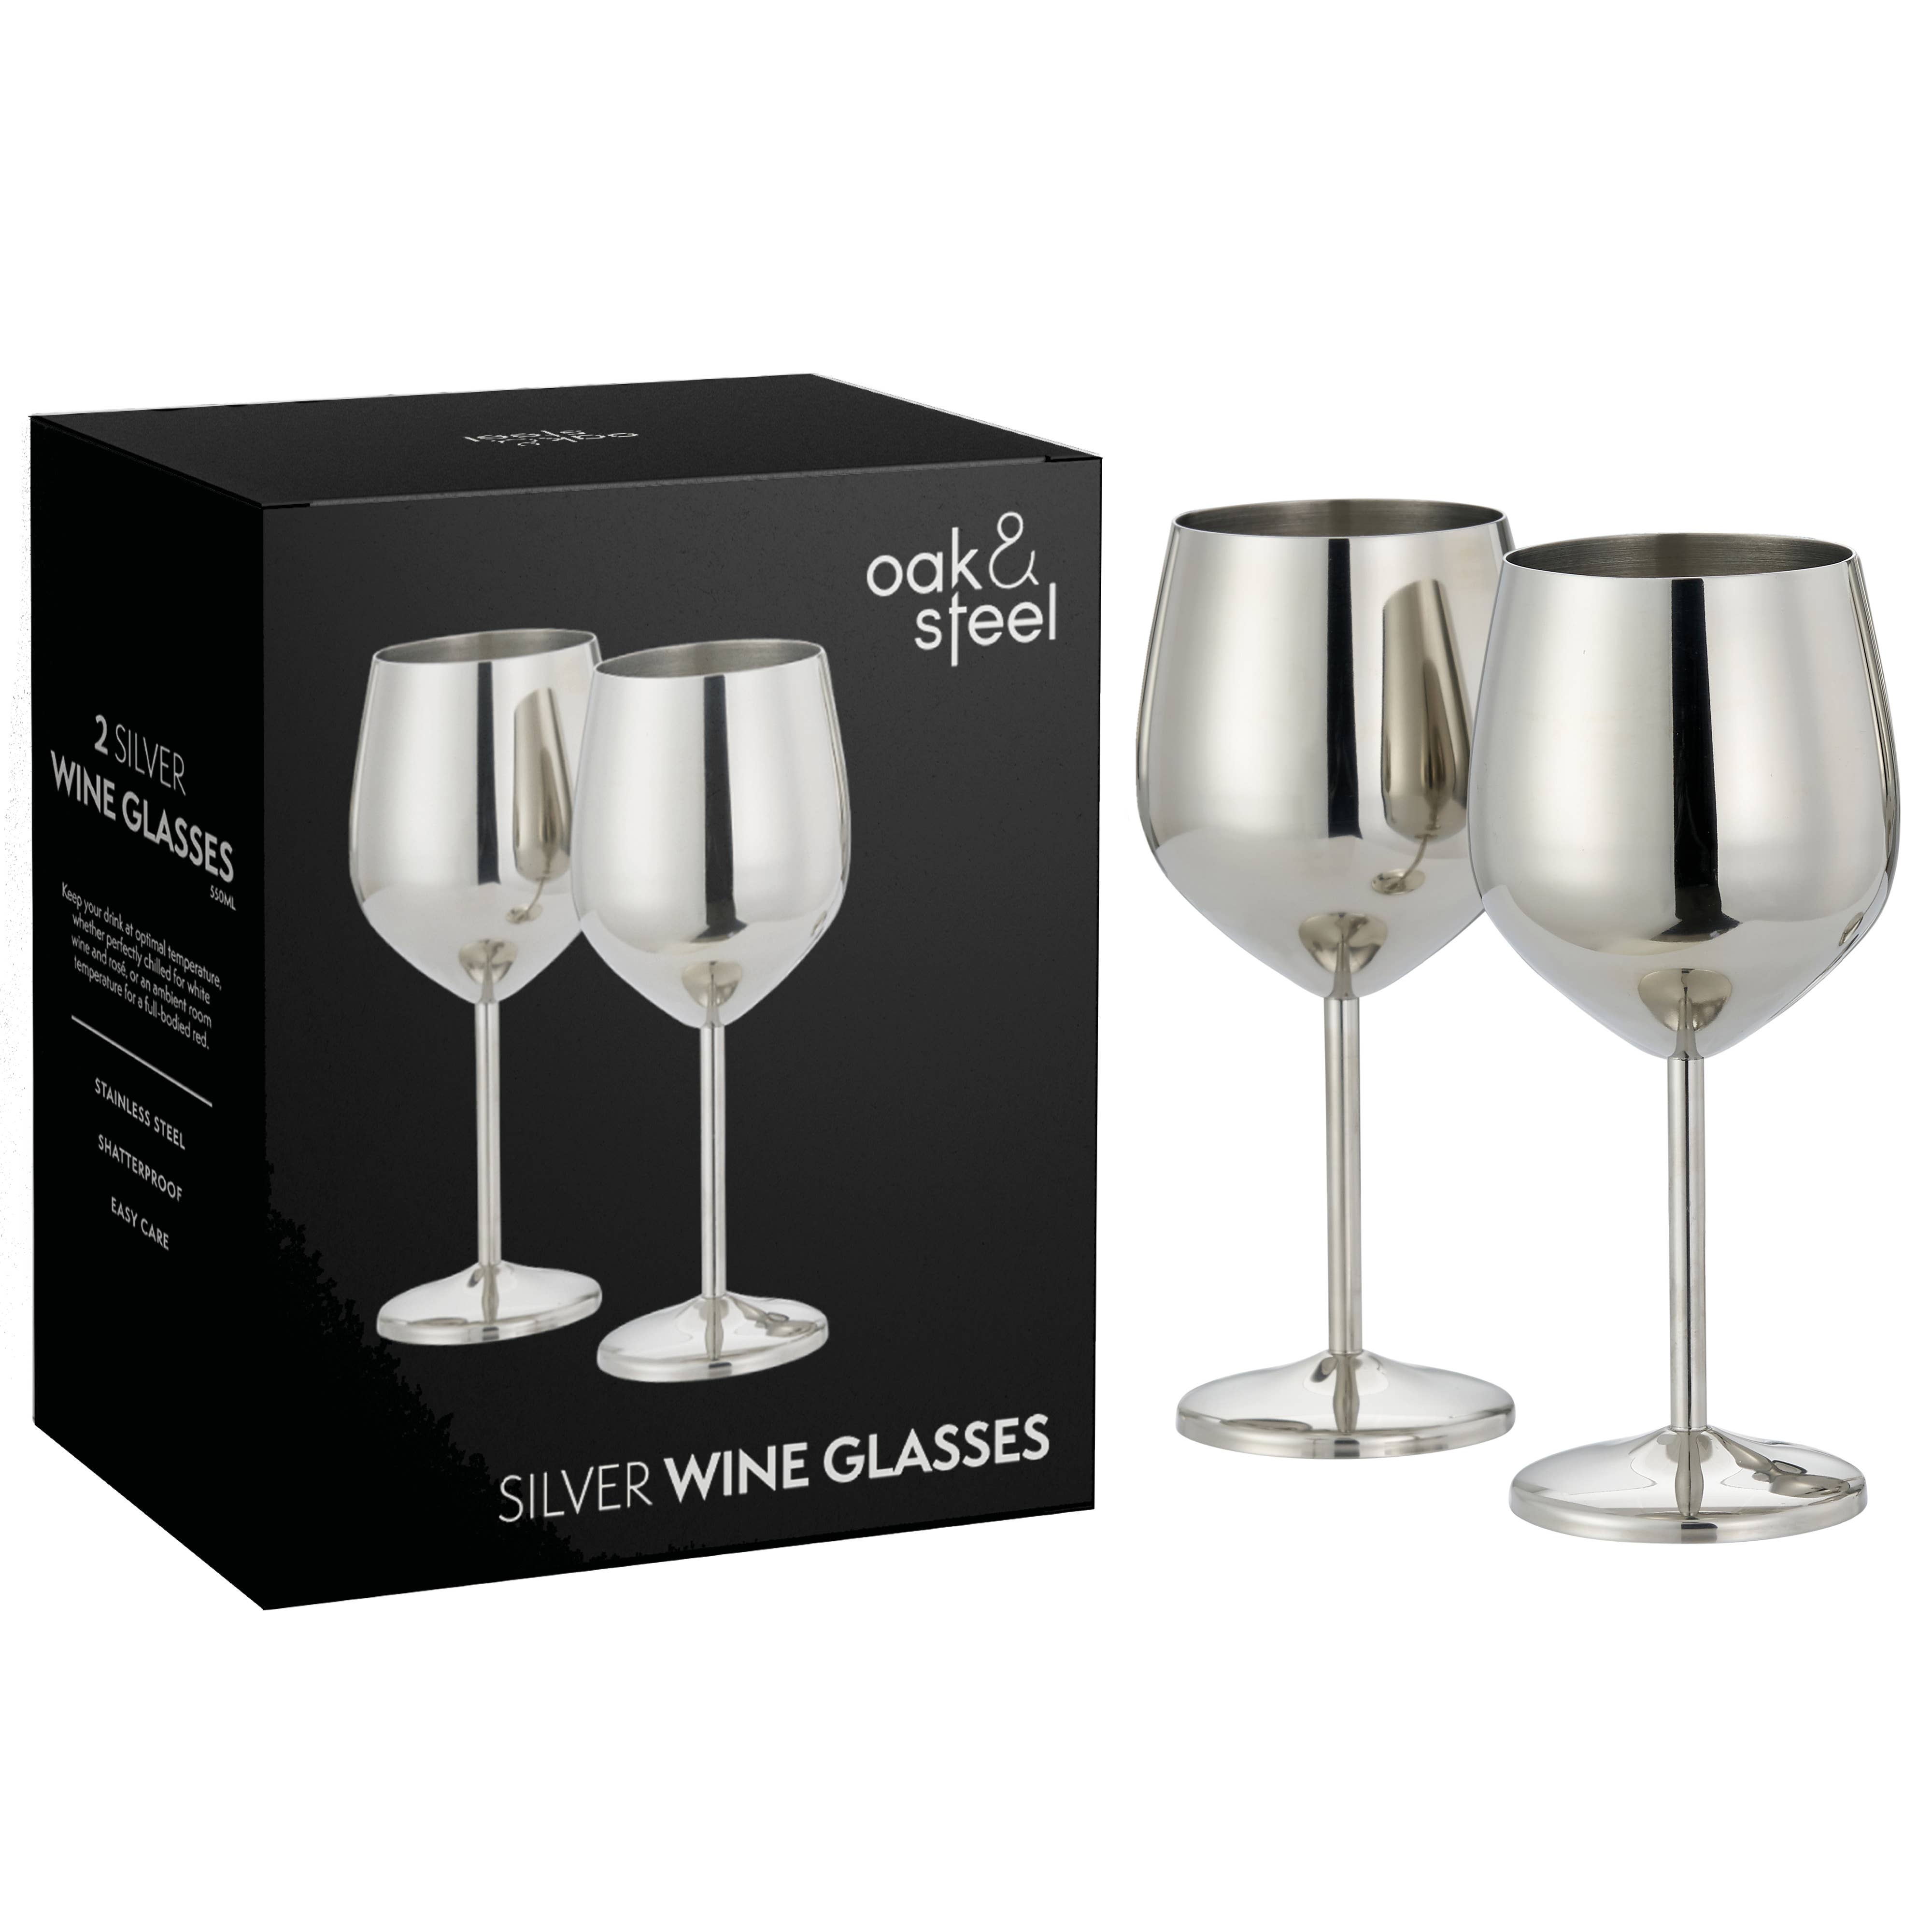 Red Wine Glass Made Of Stainless Steel, Stainless Steel Red Wine Glass Champagne  Flute Cup Drinking Cup 500 Ml Set Of 2 500 Ml